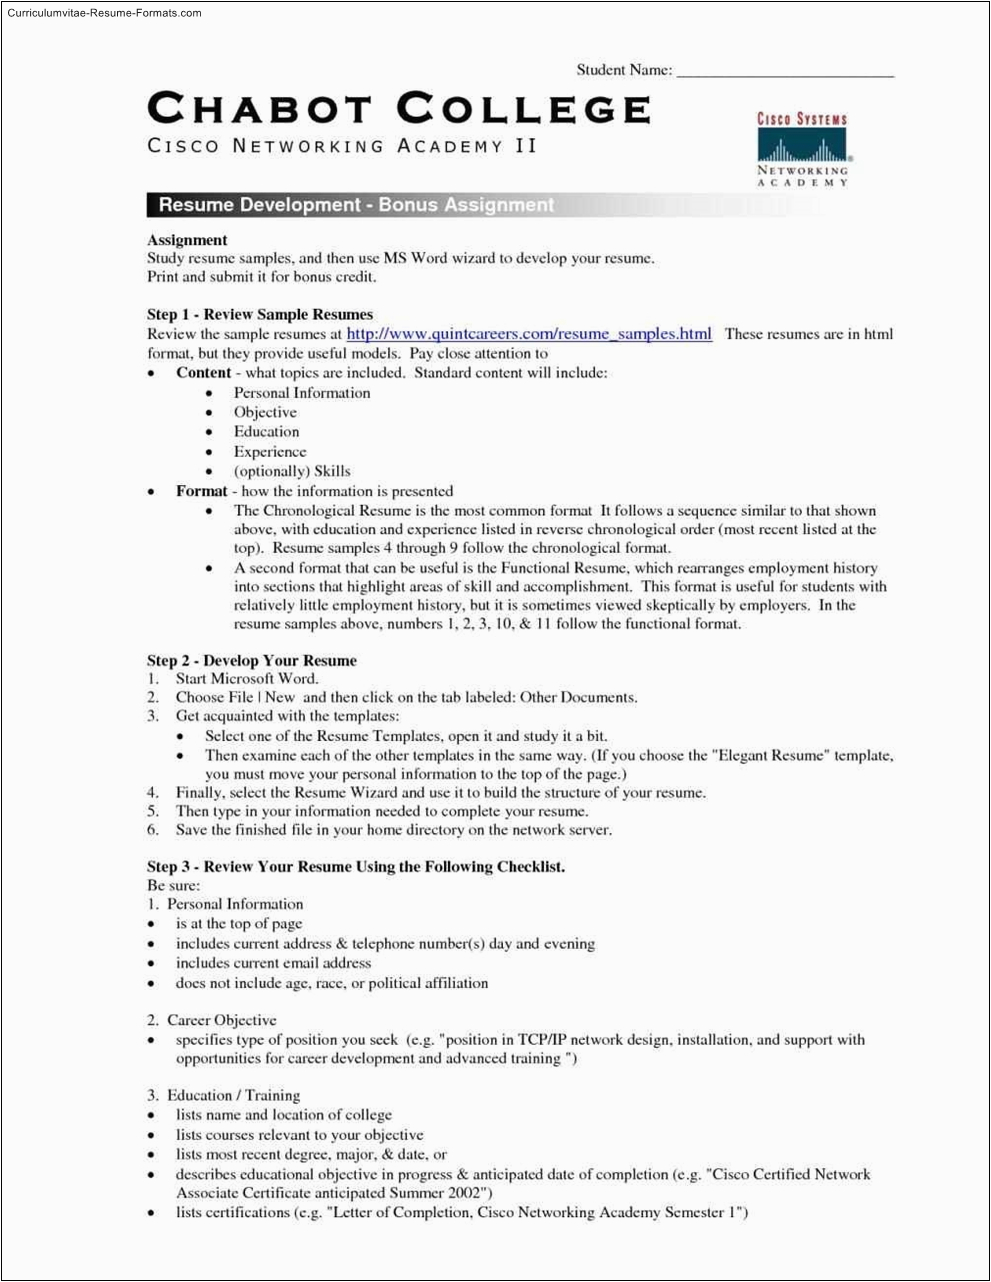 free resume templates for college students